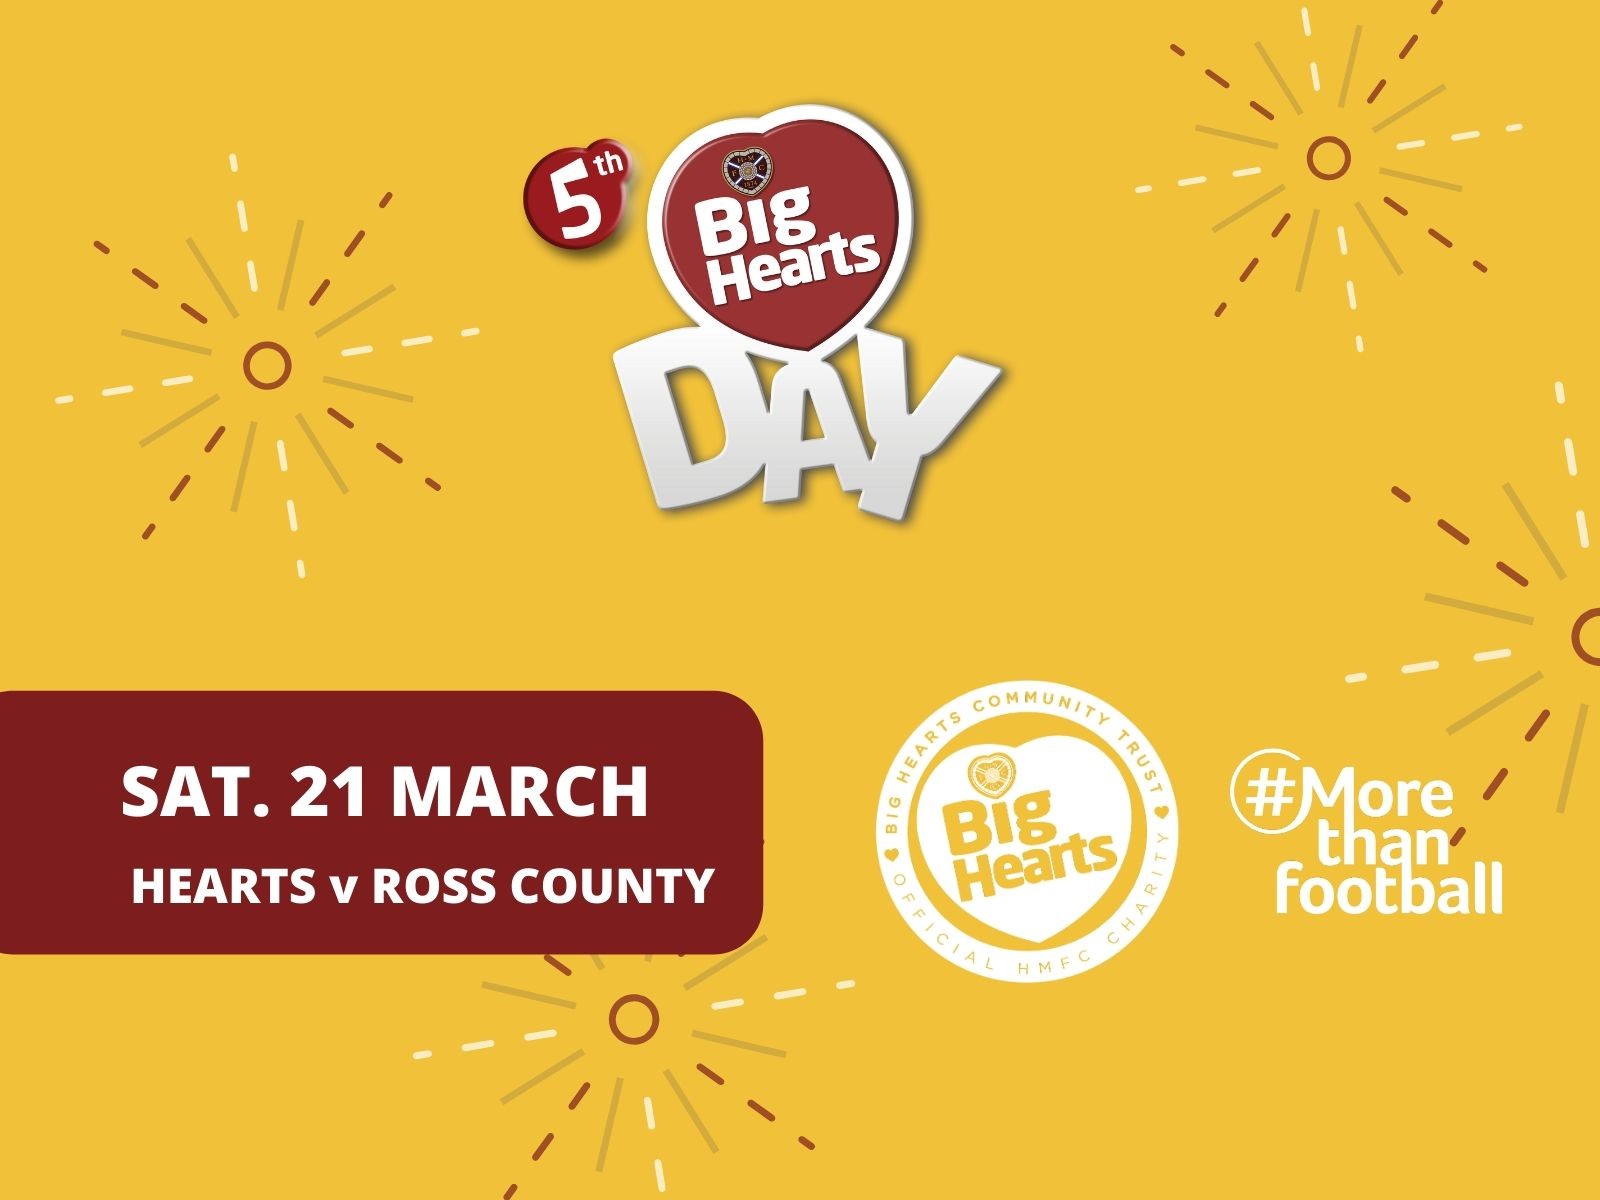  » 5th Big Hearts Day set for game Hearts v Ross County on 21 March